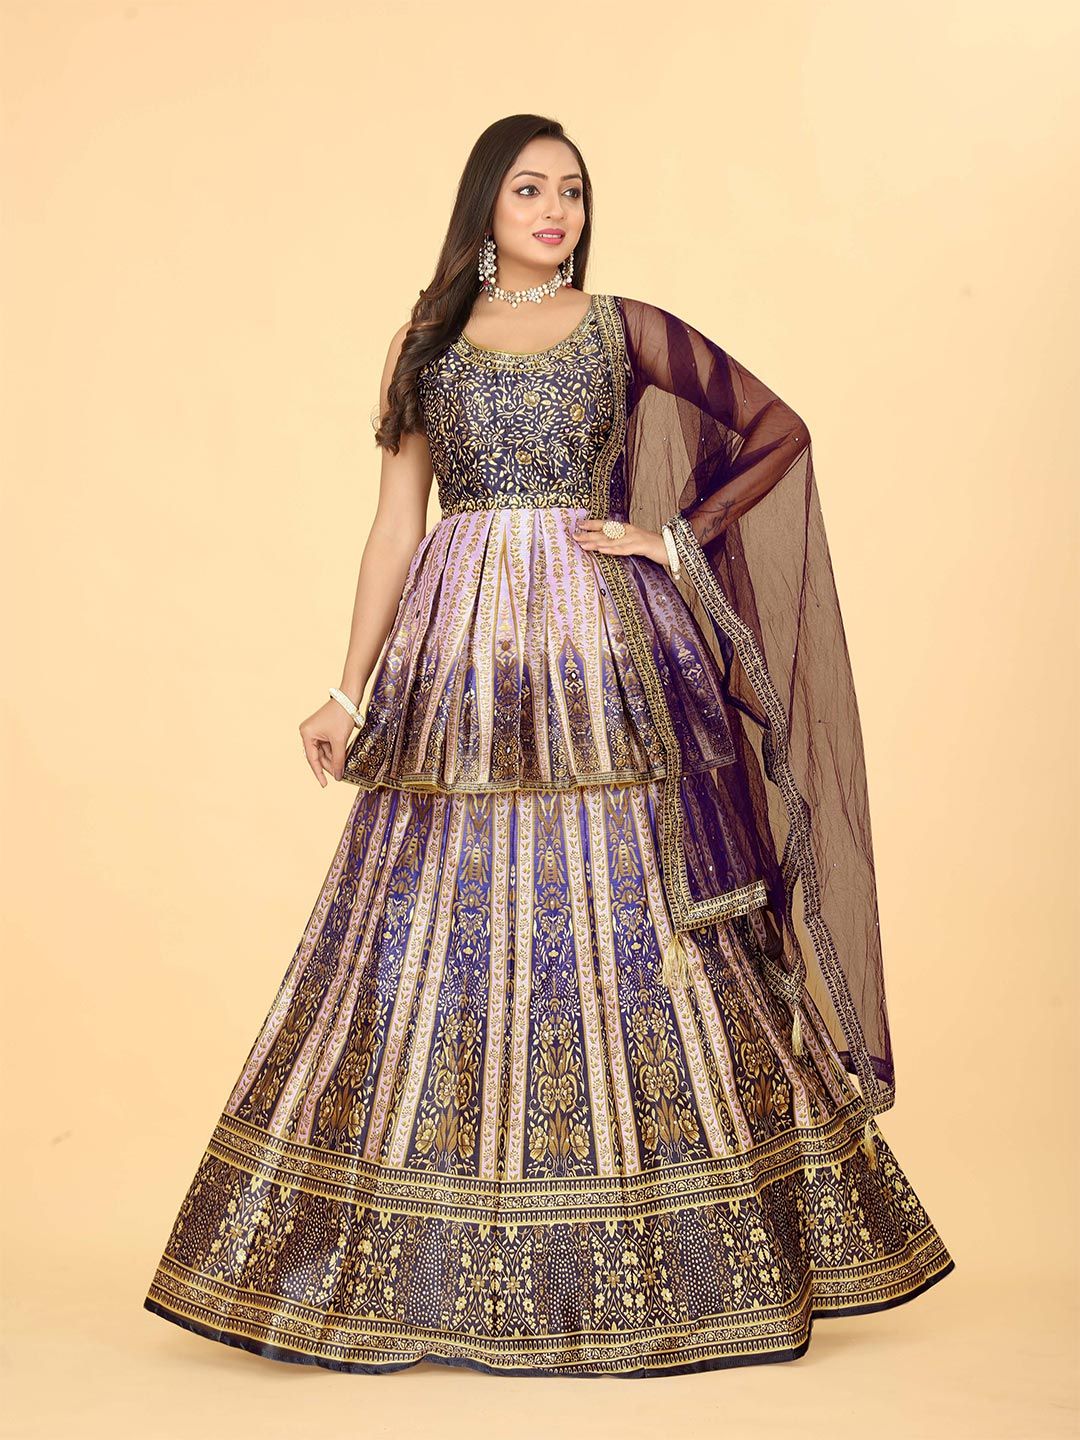 EthnicTree Ethnic Motifs Printed Beads and Stones Ready to Wear Lehenga Choli Price in India